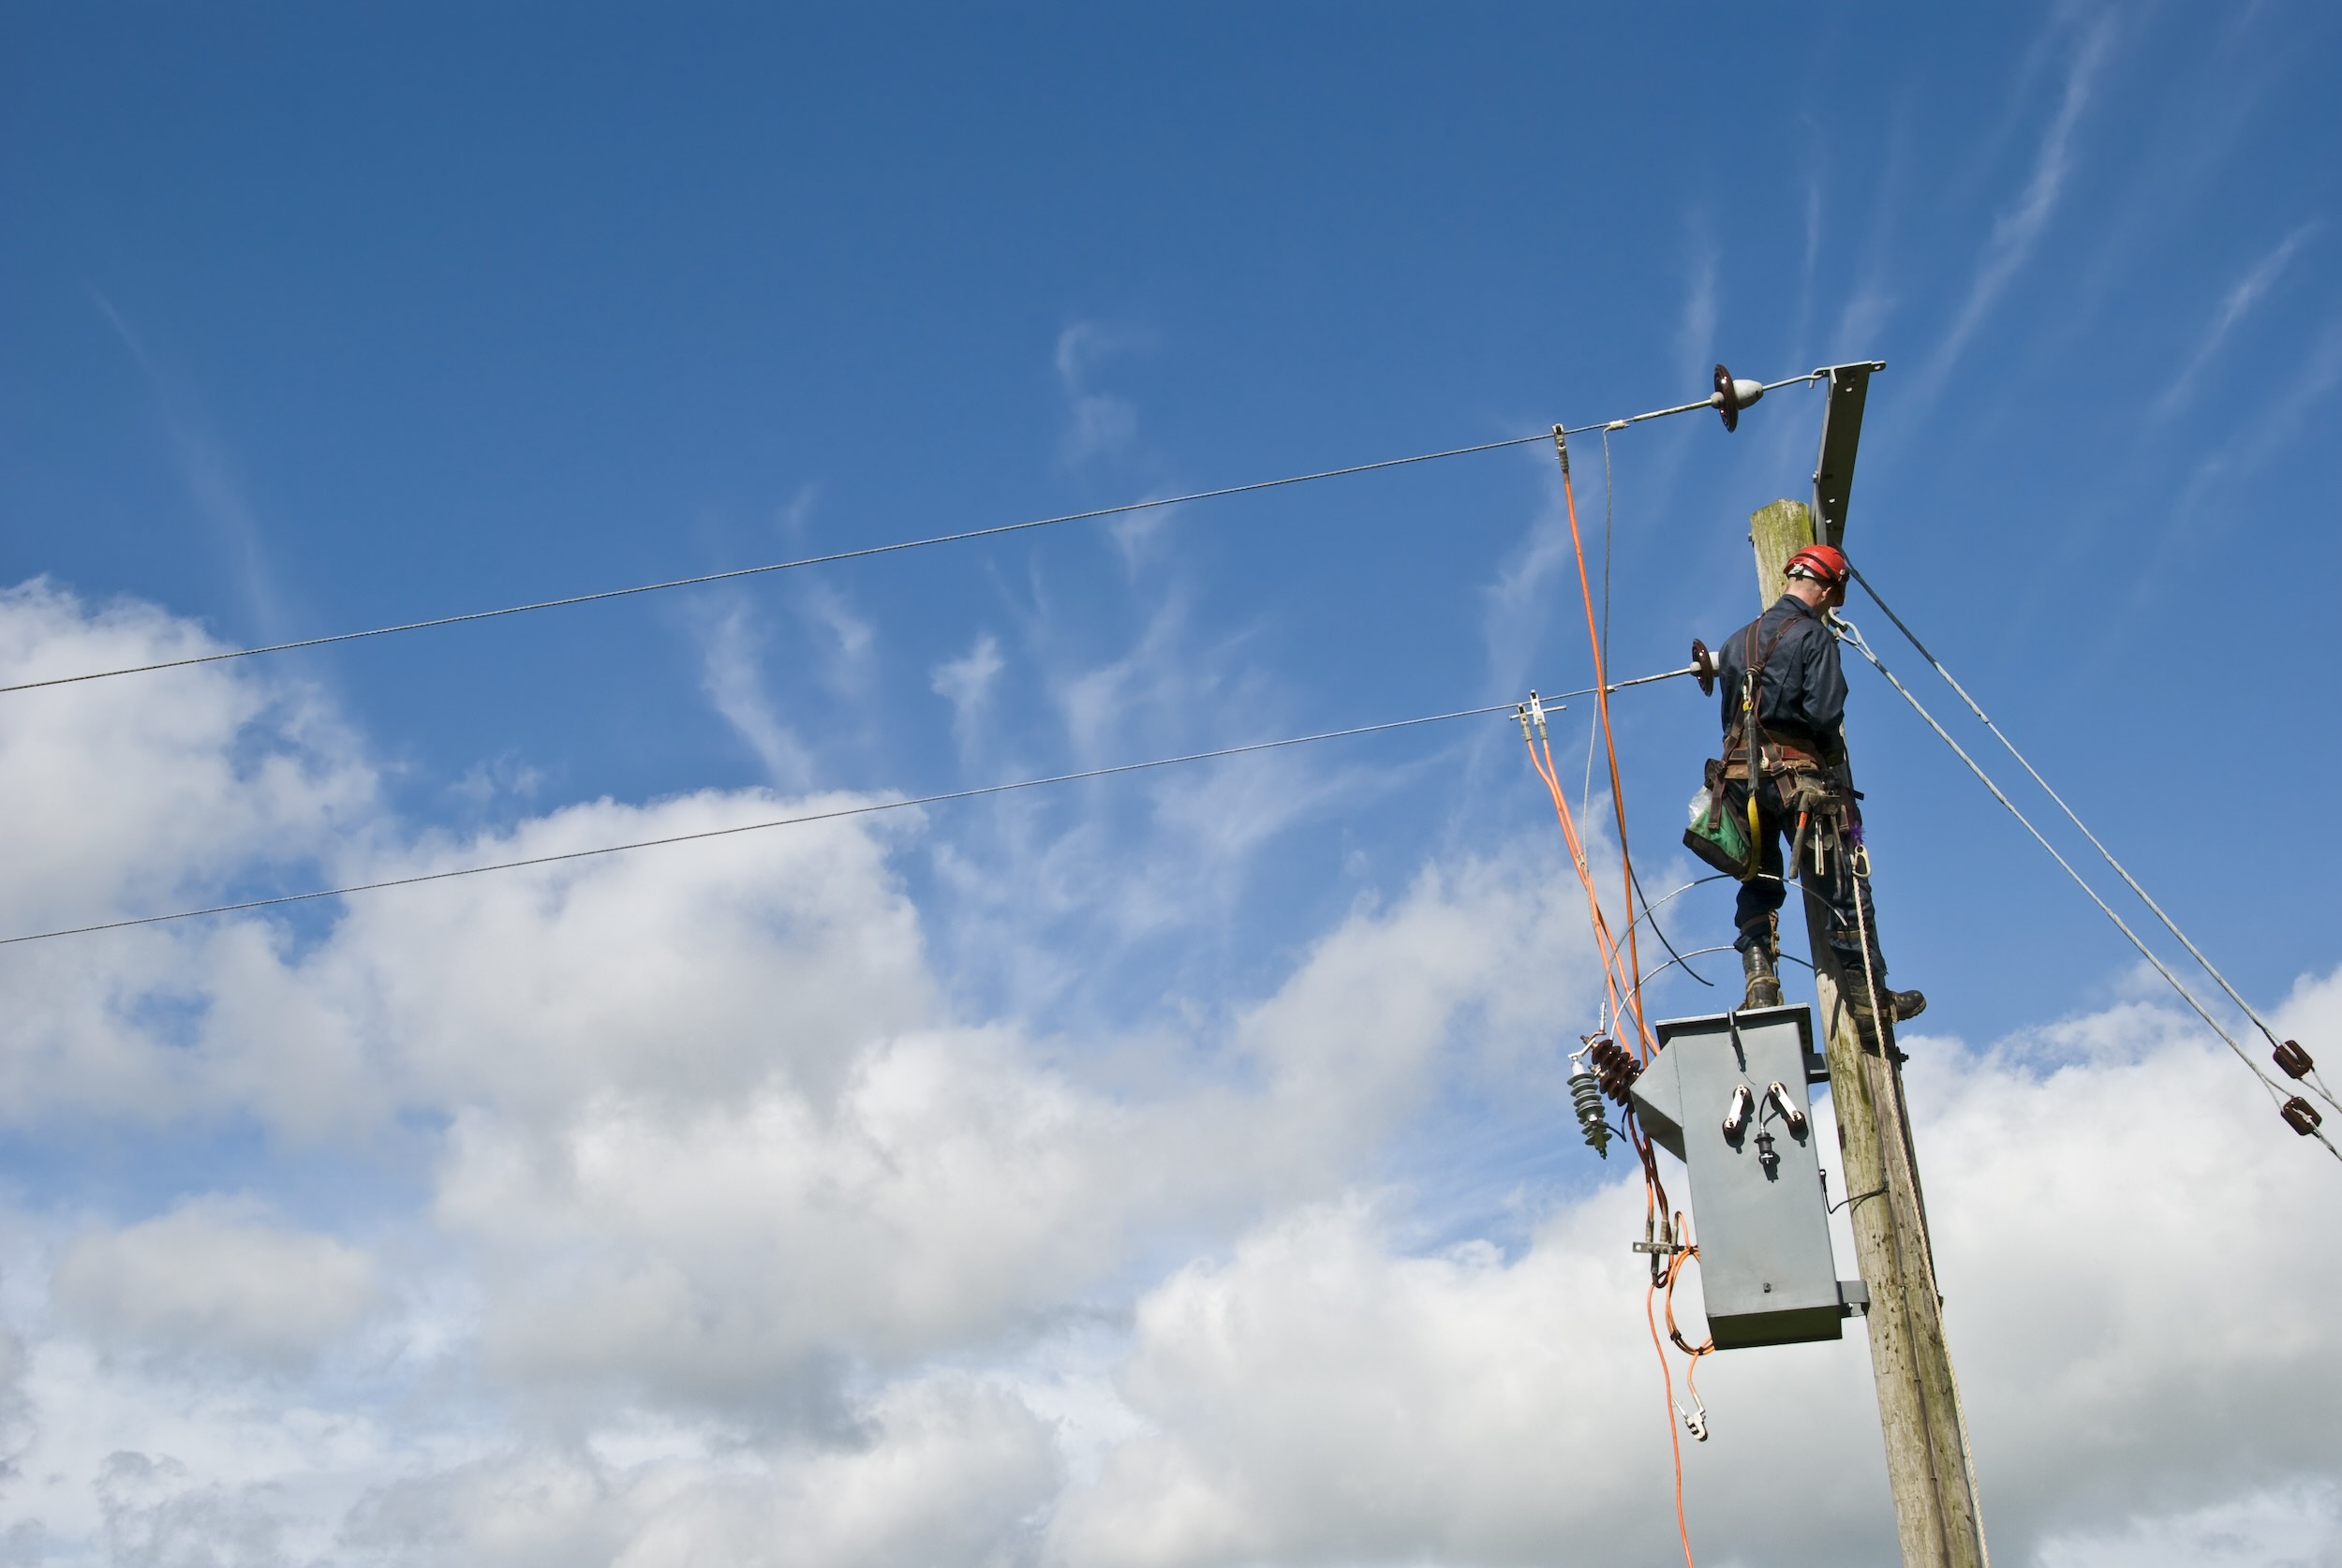 Utility worker repairing power lines under a blue sky